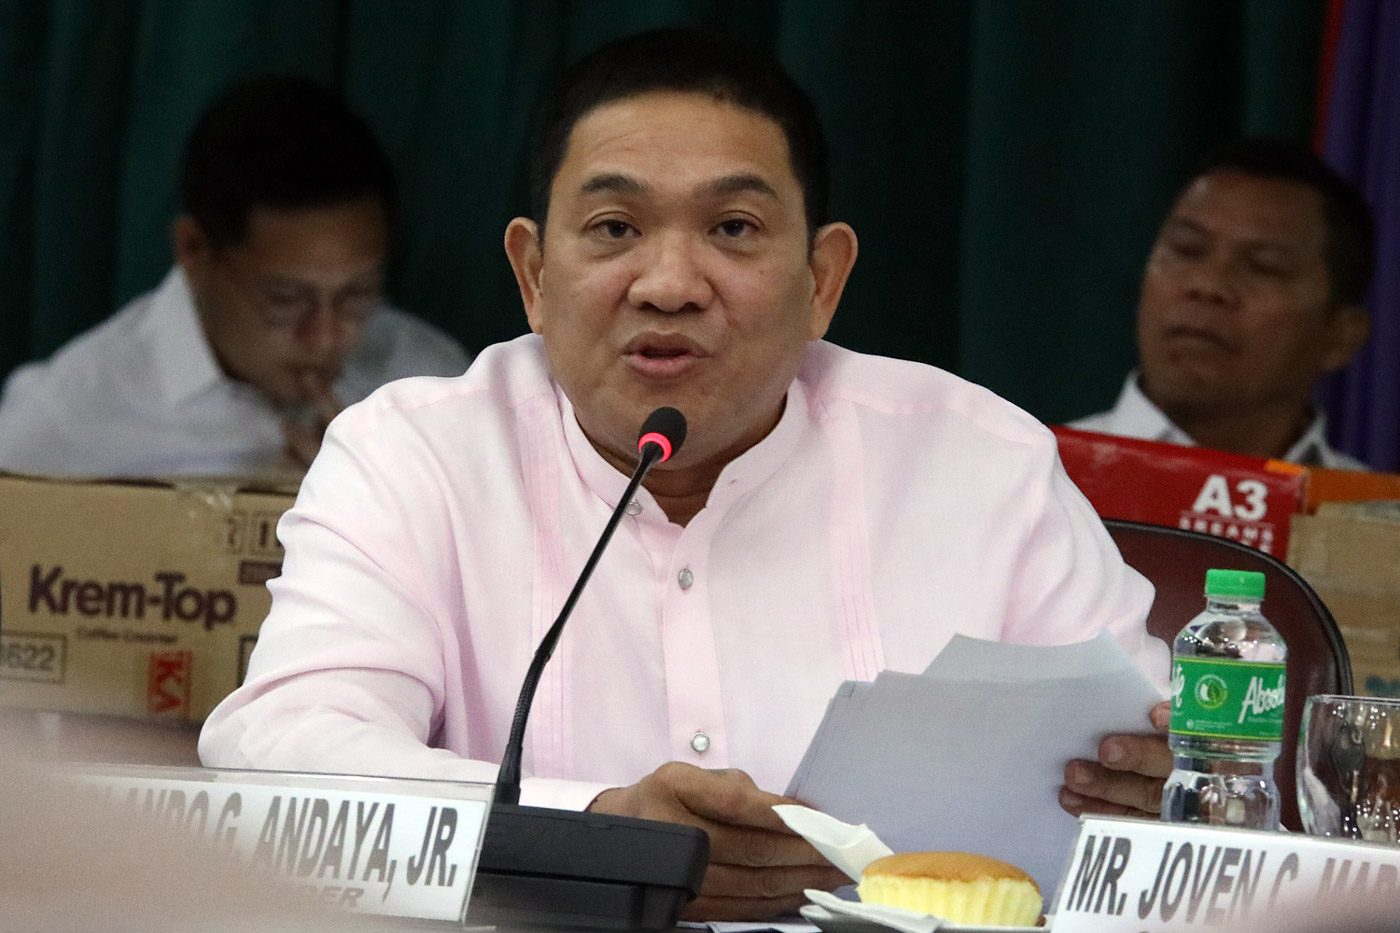 Term-sharing or graceful exit for Andaya as House majority leader?